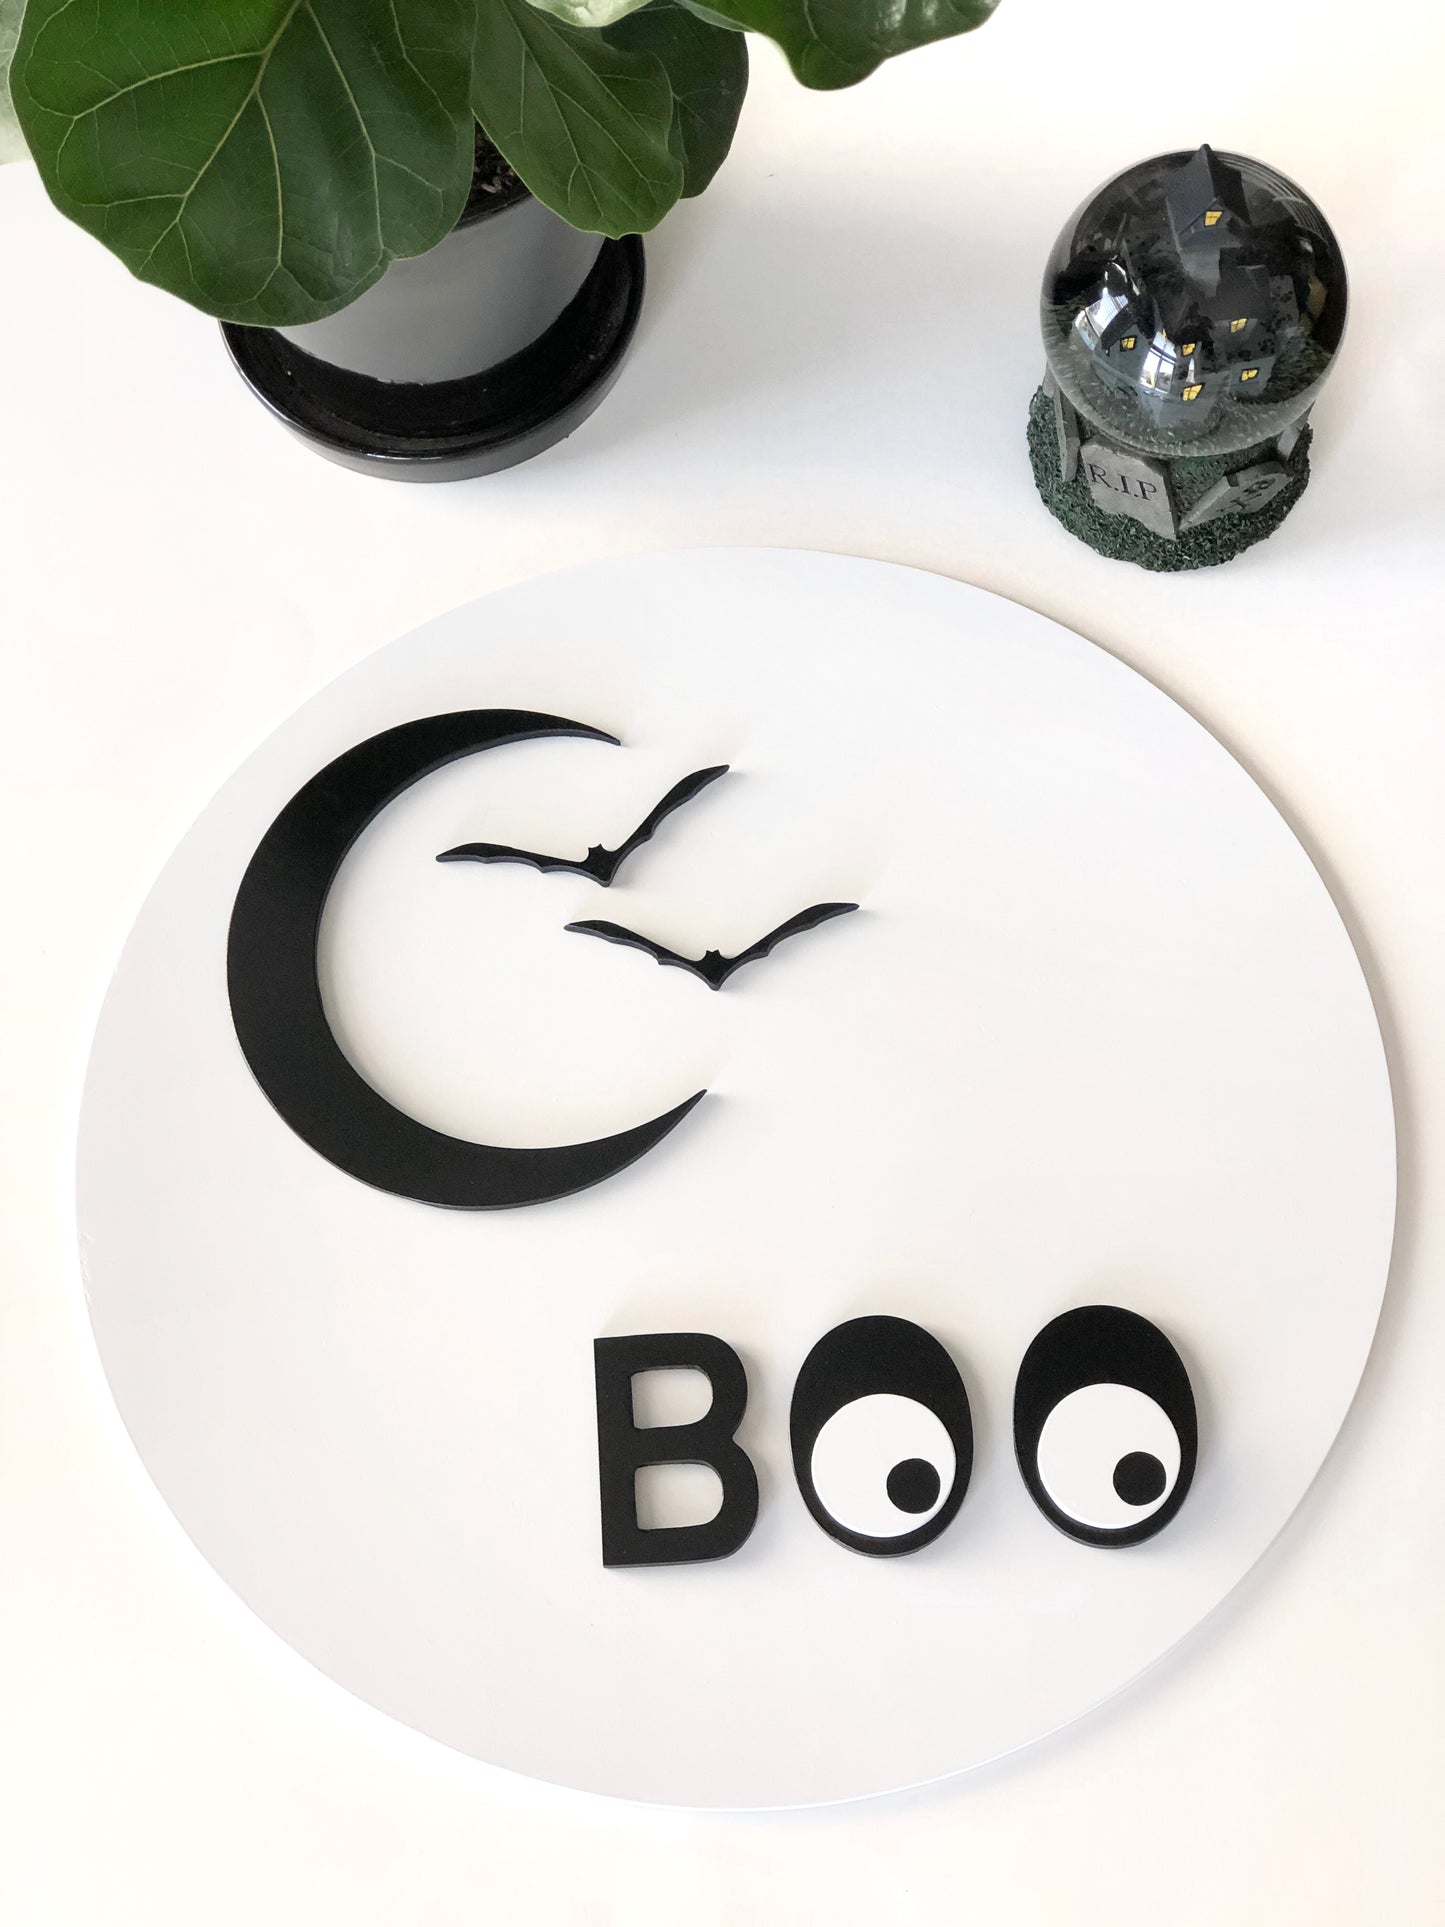 3D Boo Sign with Moon